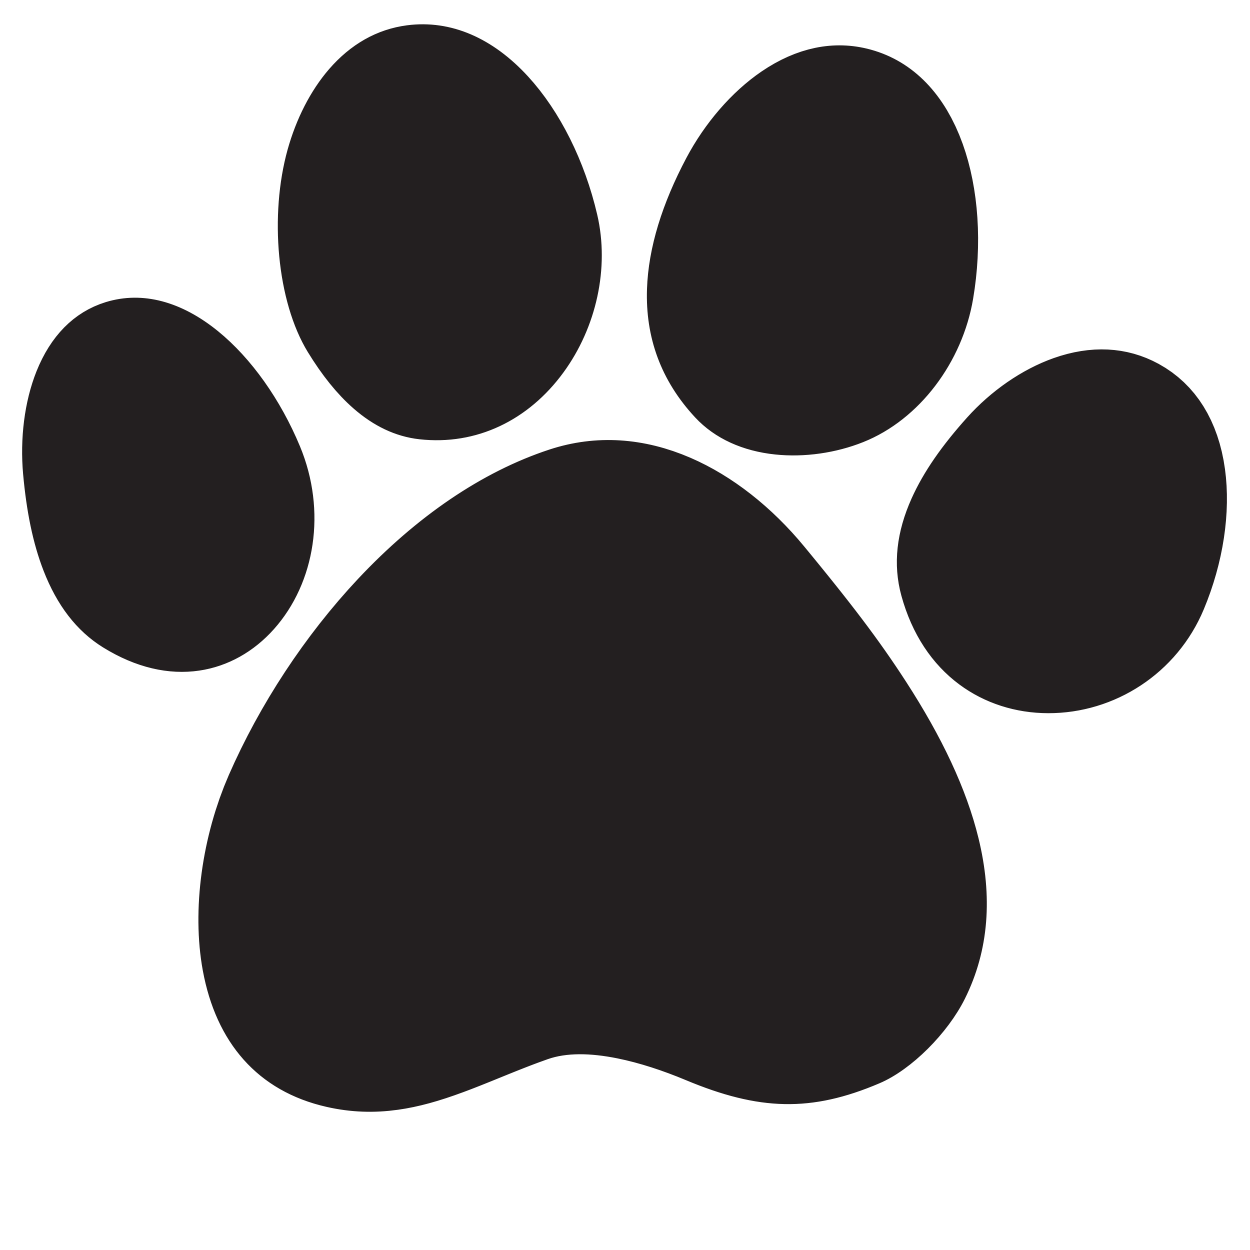 Dog Paw Vector at GetDrawings Free download